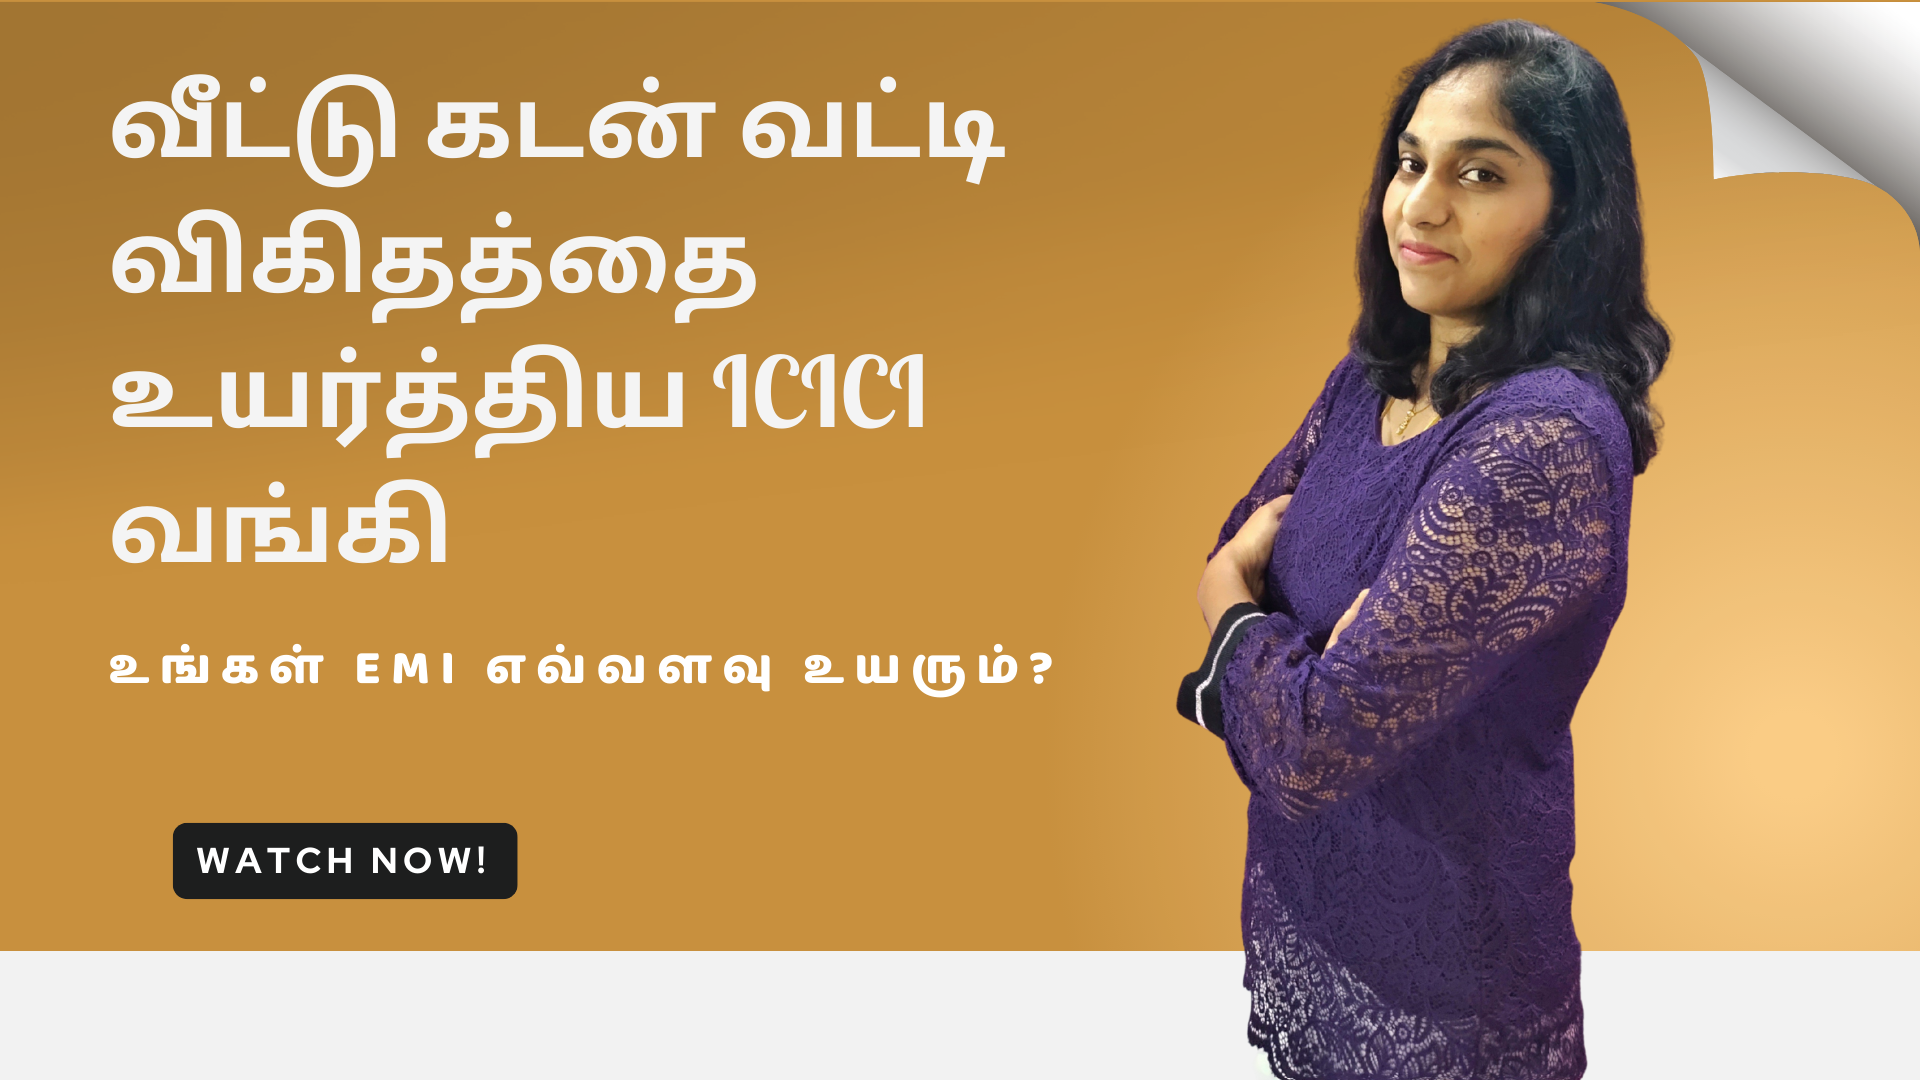 ICICI Home loan interest rate